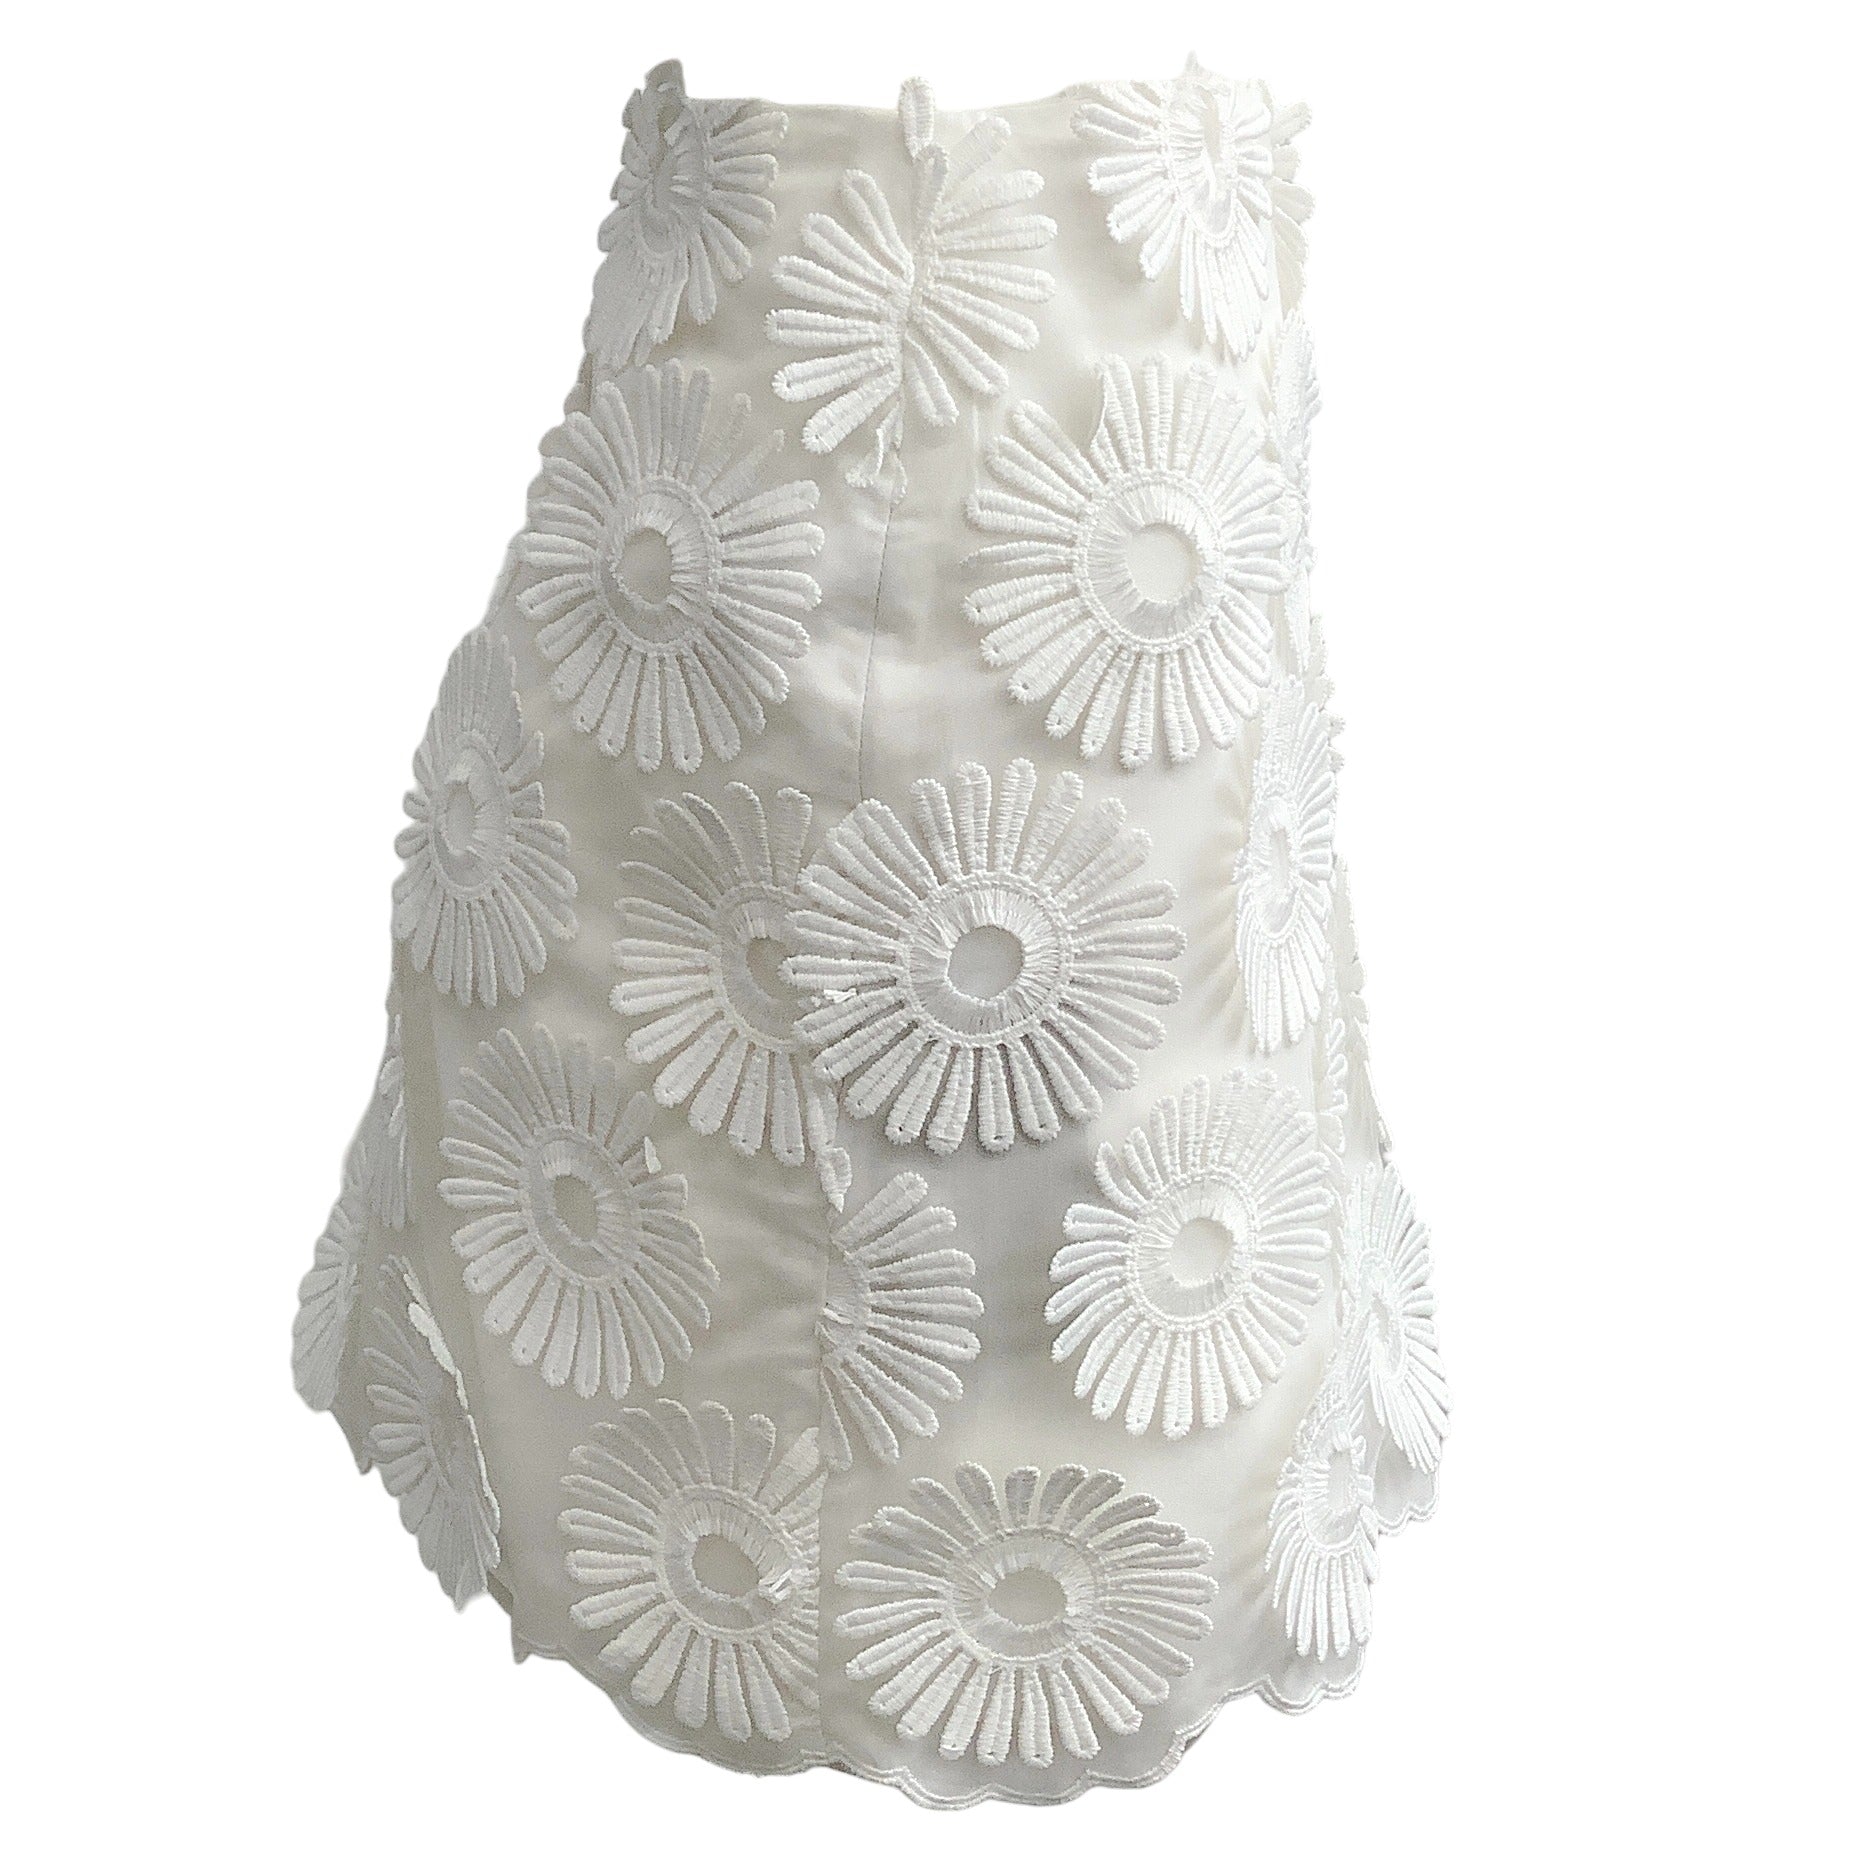 Elie Saab White Floral Embroidered Tulle Skirt